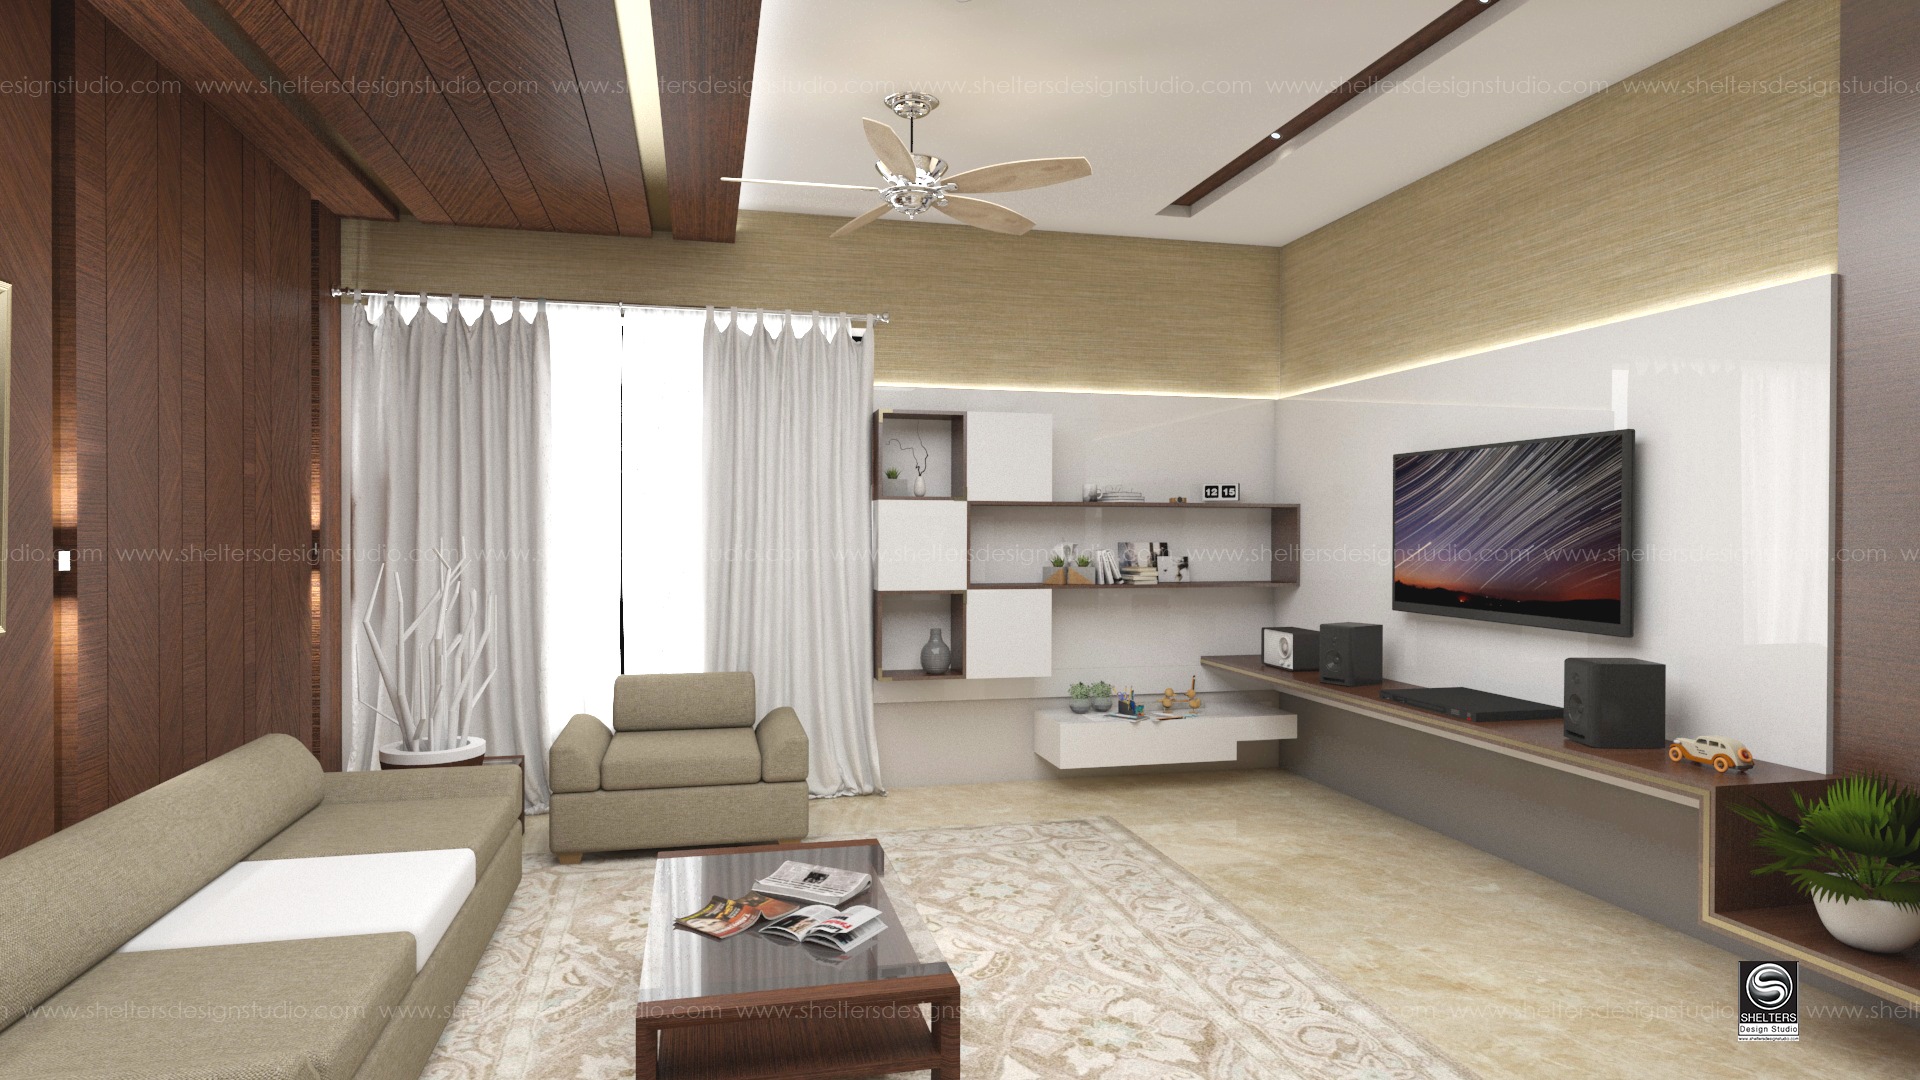 Home Interior Design in Madurai - Shelters Design StudioConstructionDecorate Your HomeAll Indiaother